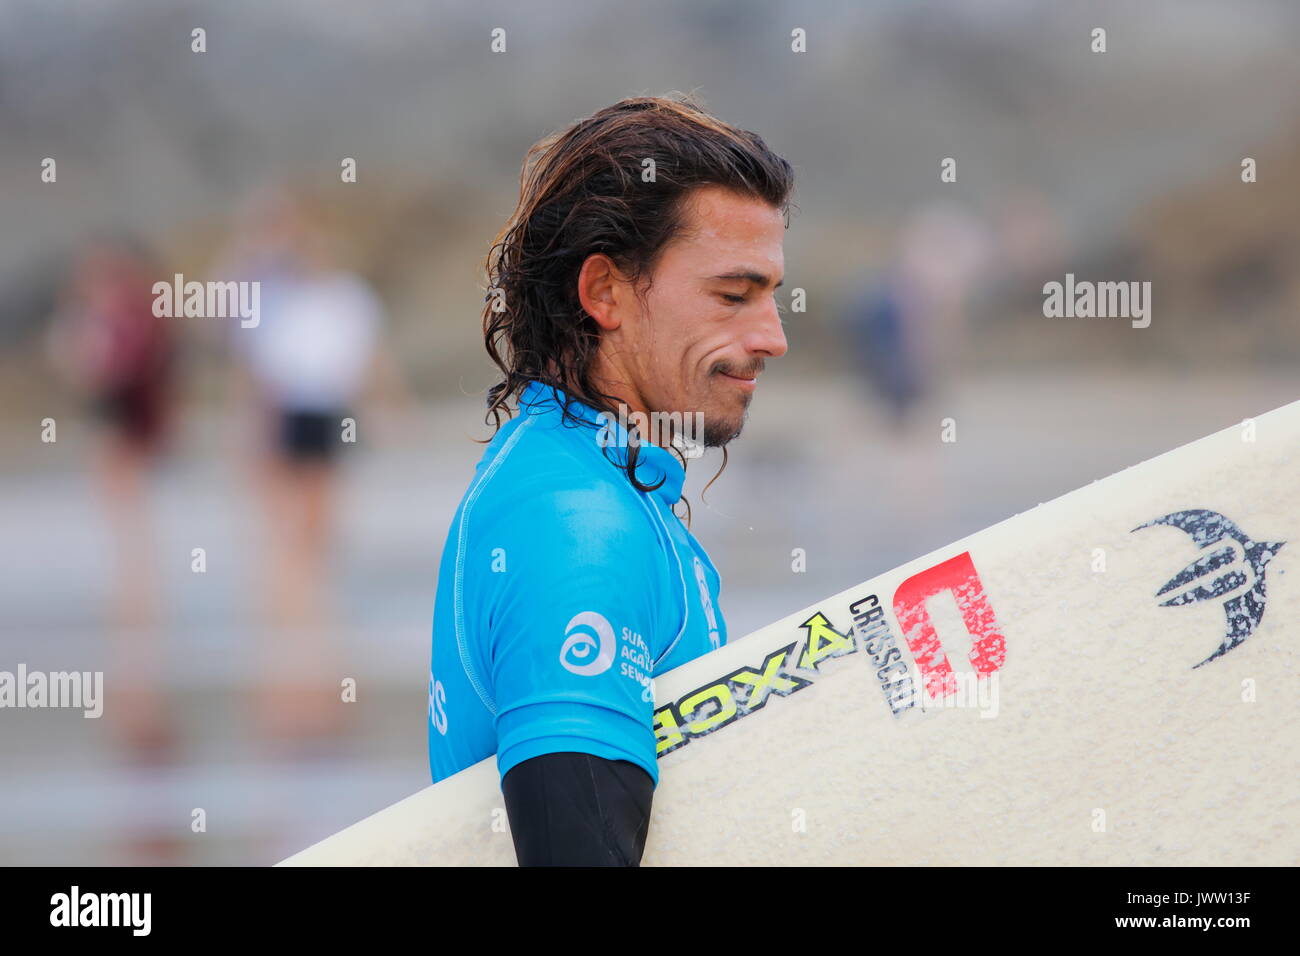 Fistral Beach, Newquay, Cornwall, UK. 13th Aug, 2017. Surfers take part in Day 5 of the Boardmasters Championship. This featured longboard surfers from around the world including Edouard Delpero seen here. Credit: Nicholas Burningham/Alamy Live News Stock Photo